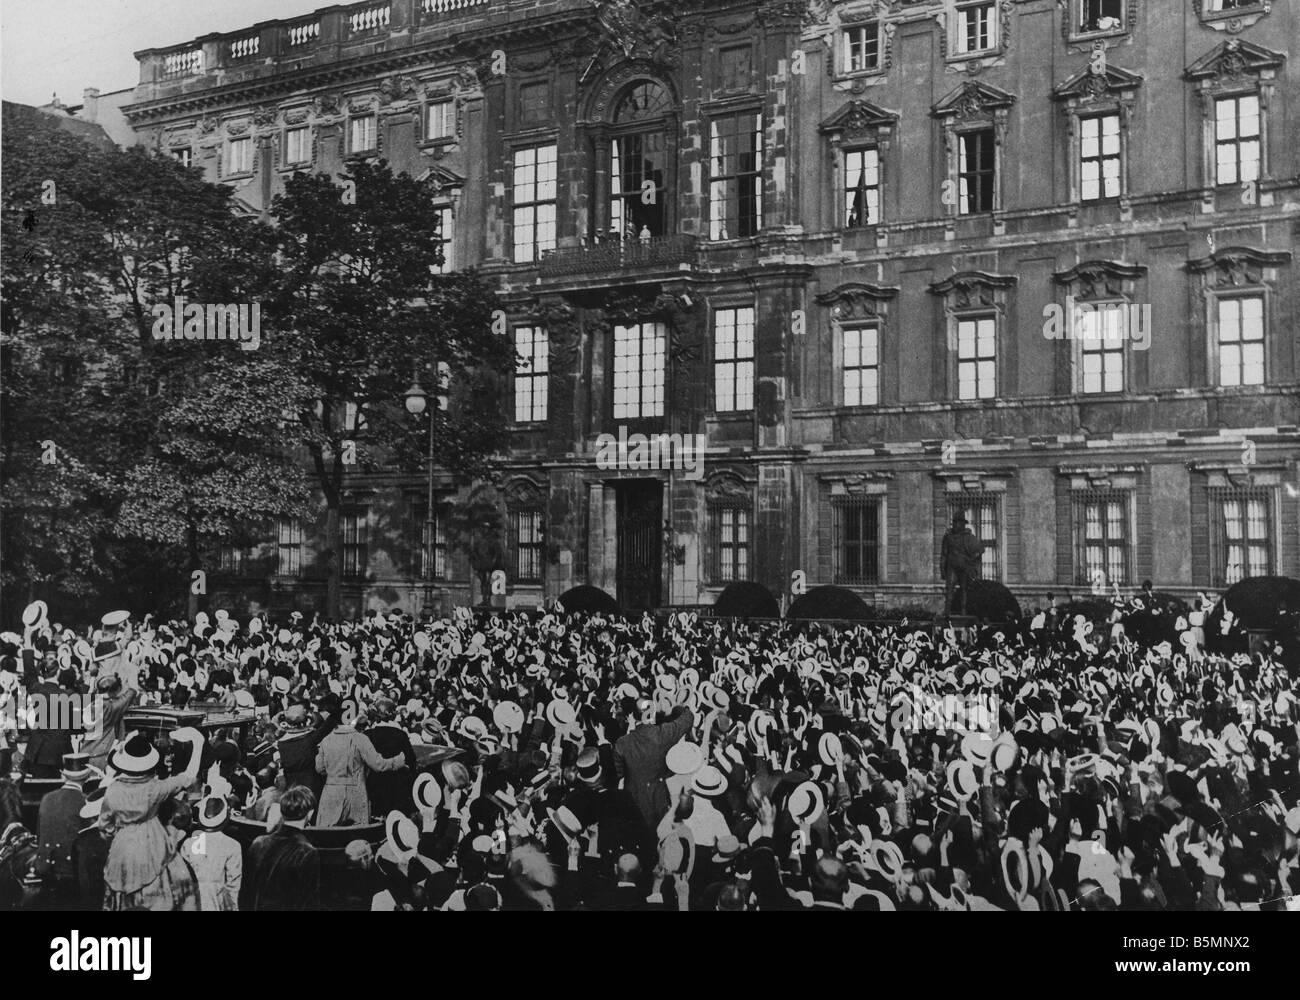 8 1914 8 1 A3 7 Kaiser s speech Berlin 1914 World War I 1914 18 Berlin The outbreak of war and mobilisation of troops on 1 Augus Stock Photo